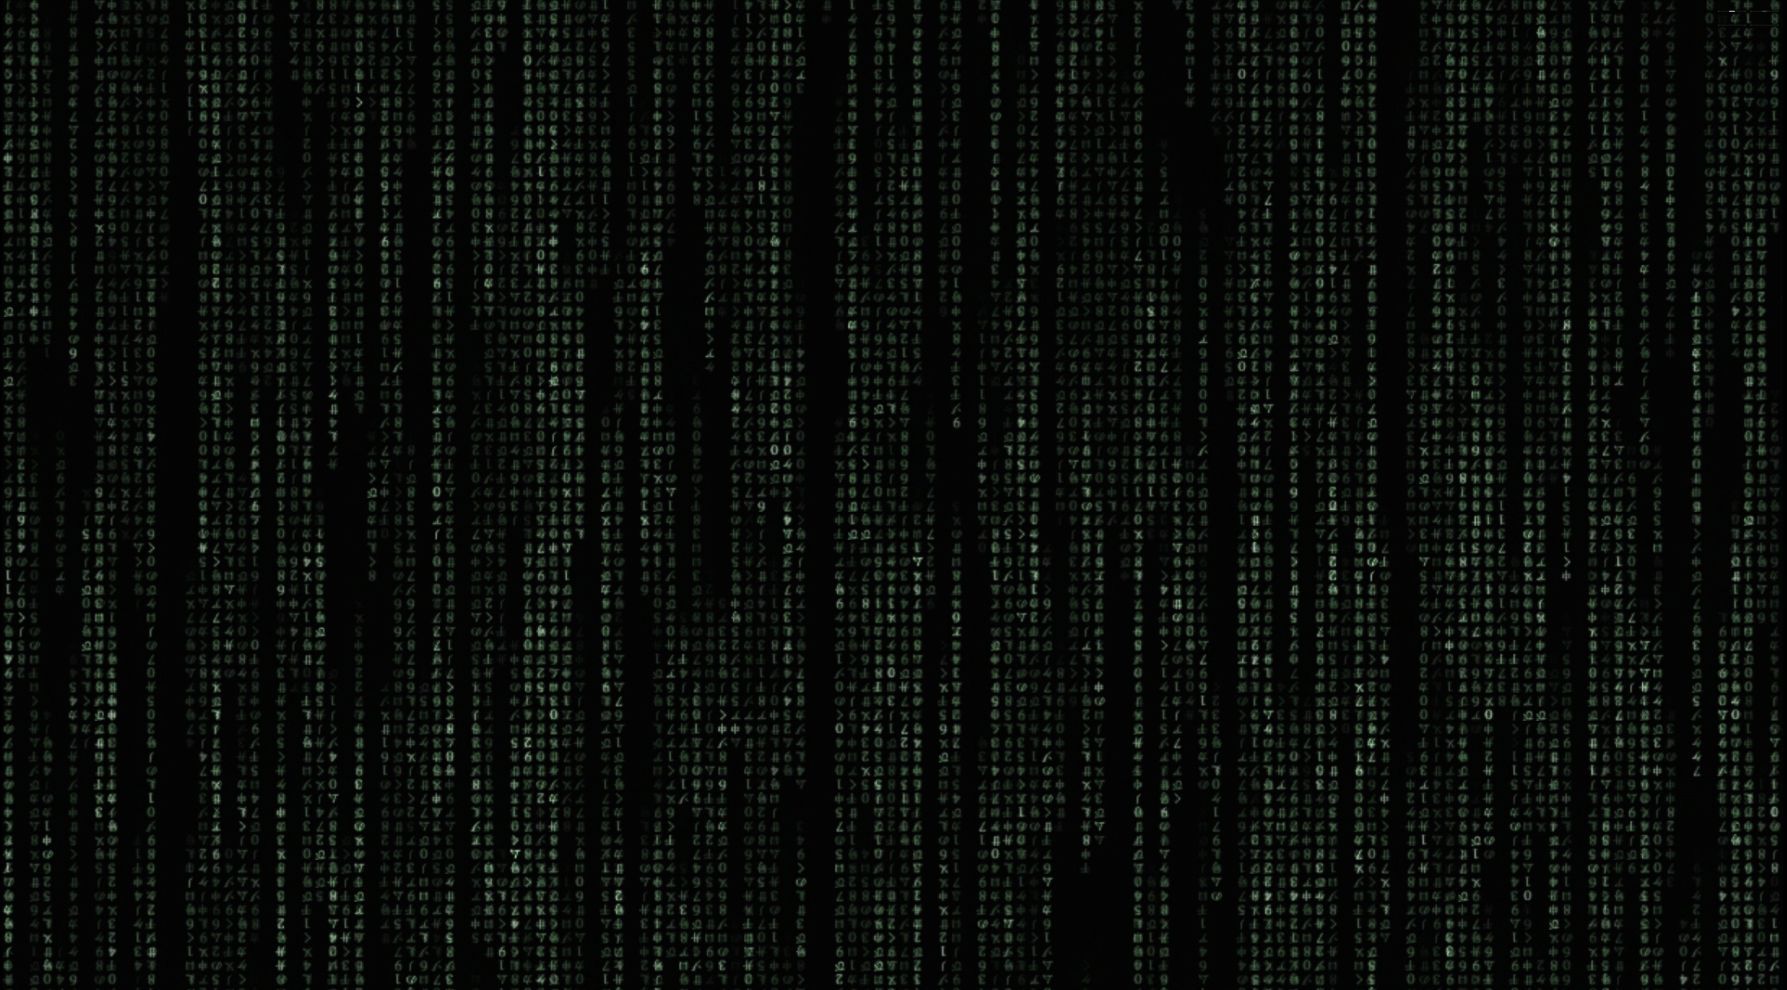 Animated Matrix Code AKA Dream scene (Video and DL link in comments)